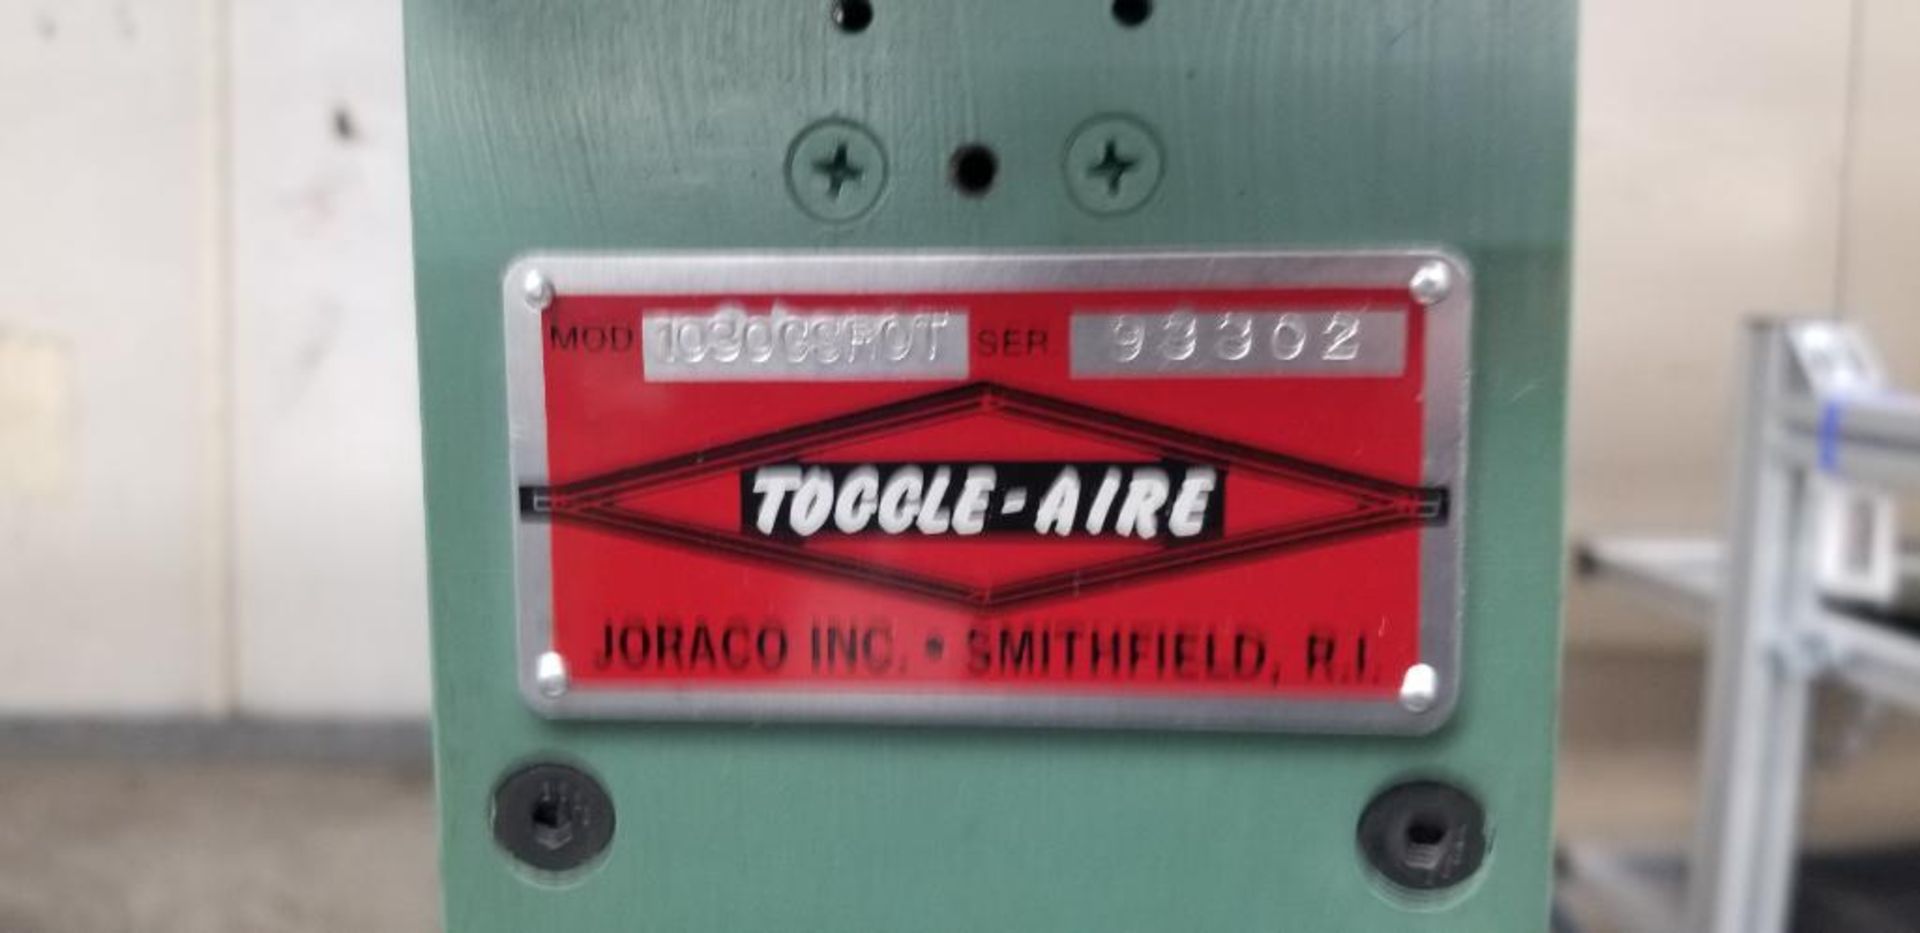 Joraco Toggle-Aire Benchtop Pneumatic Toggle Press, Model 1030CSROT, S/N 93302, w/ Toggle-Aire Model - Image 3 of 5